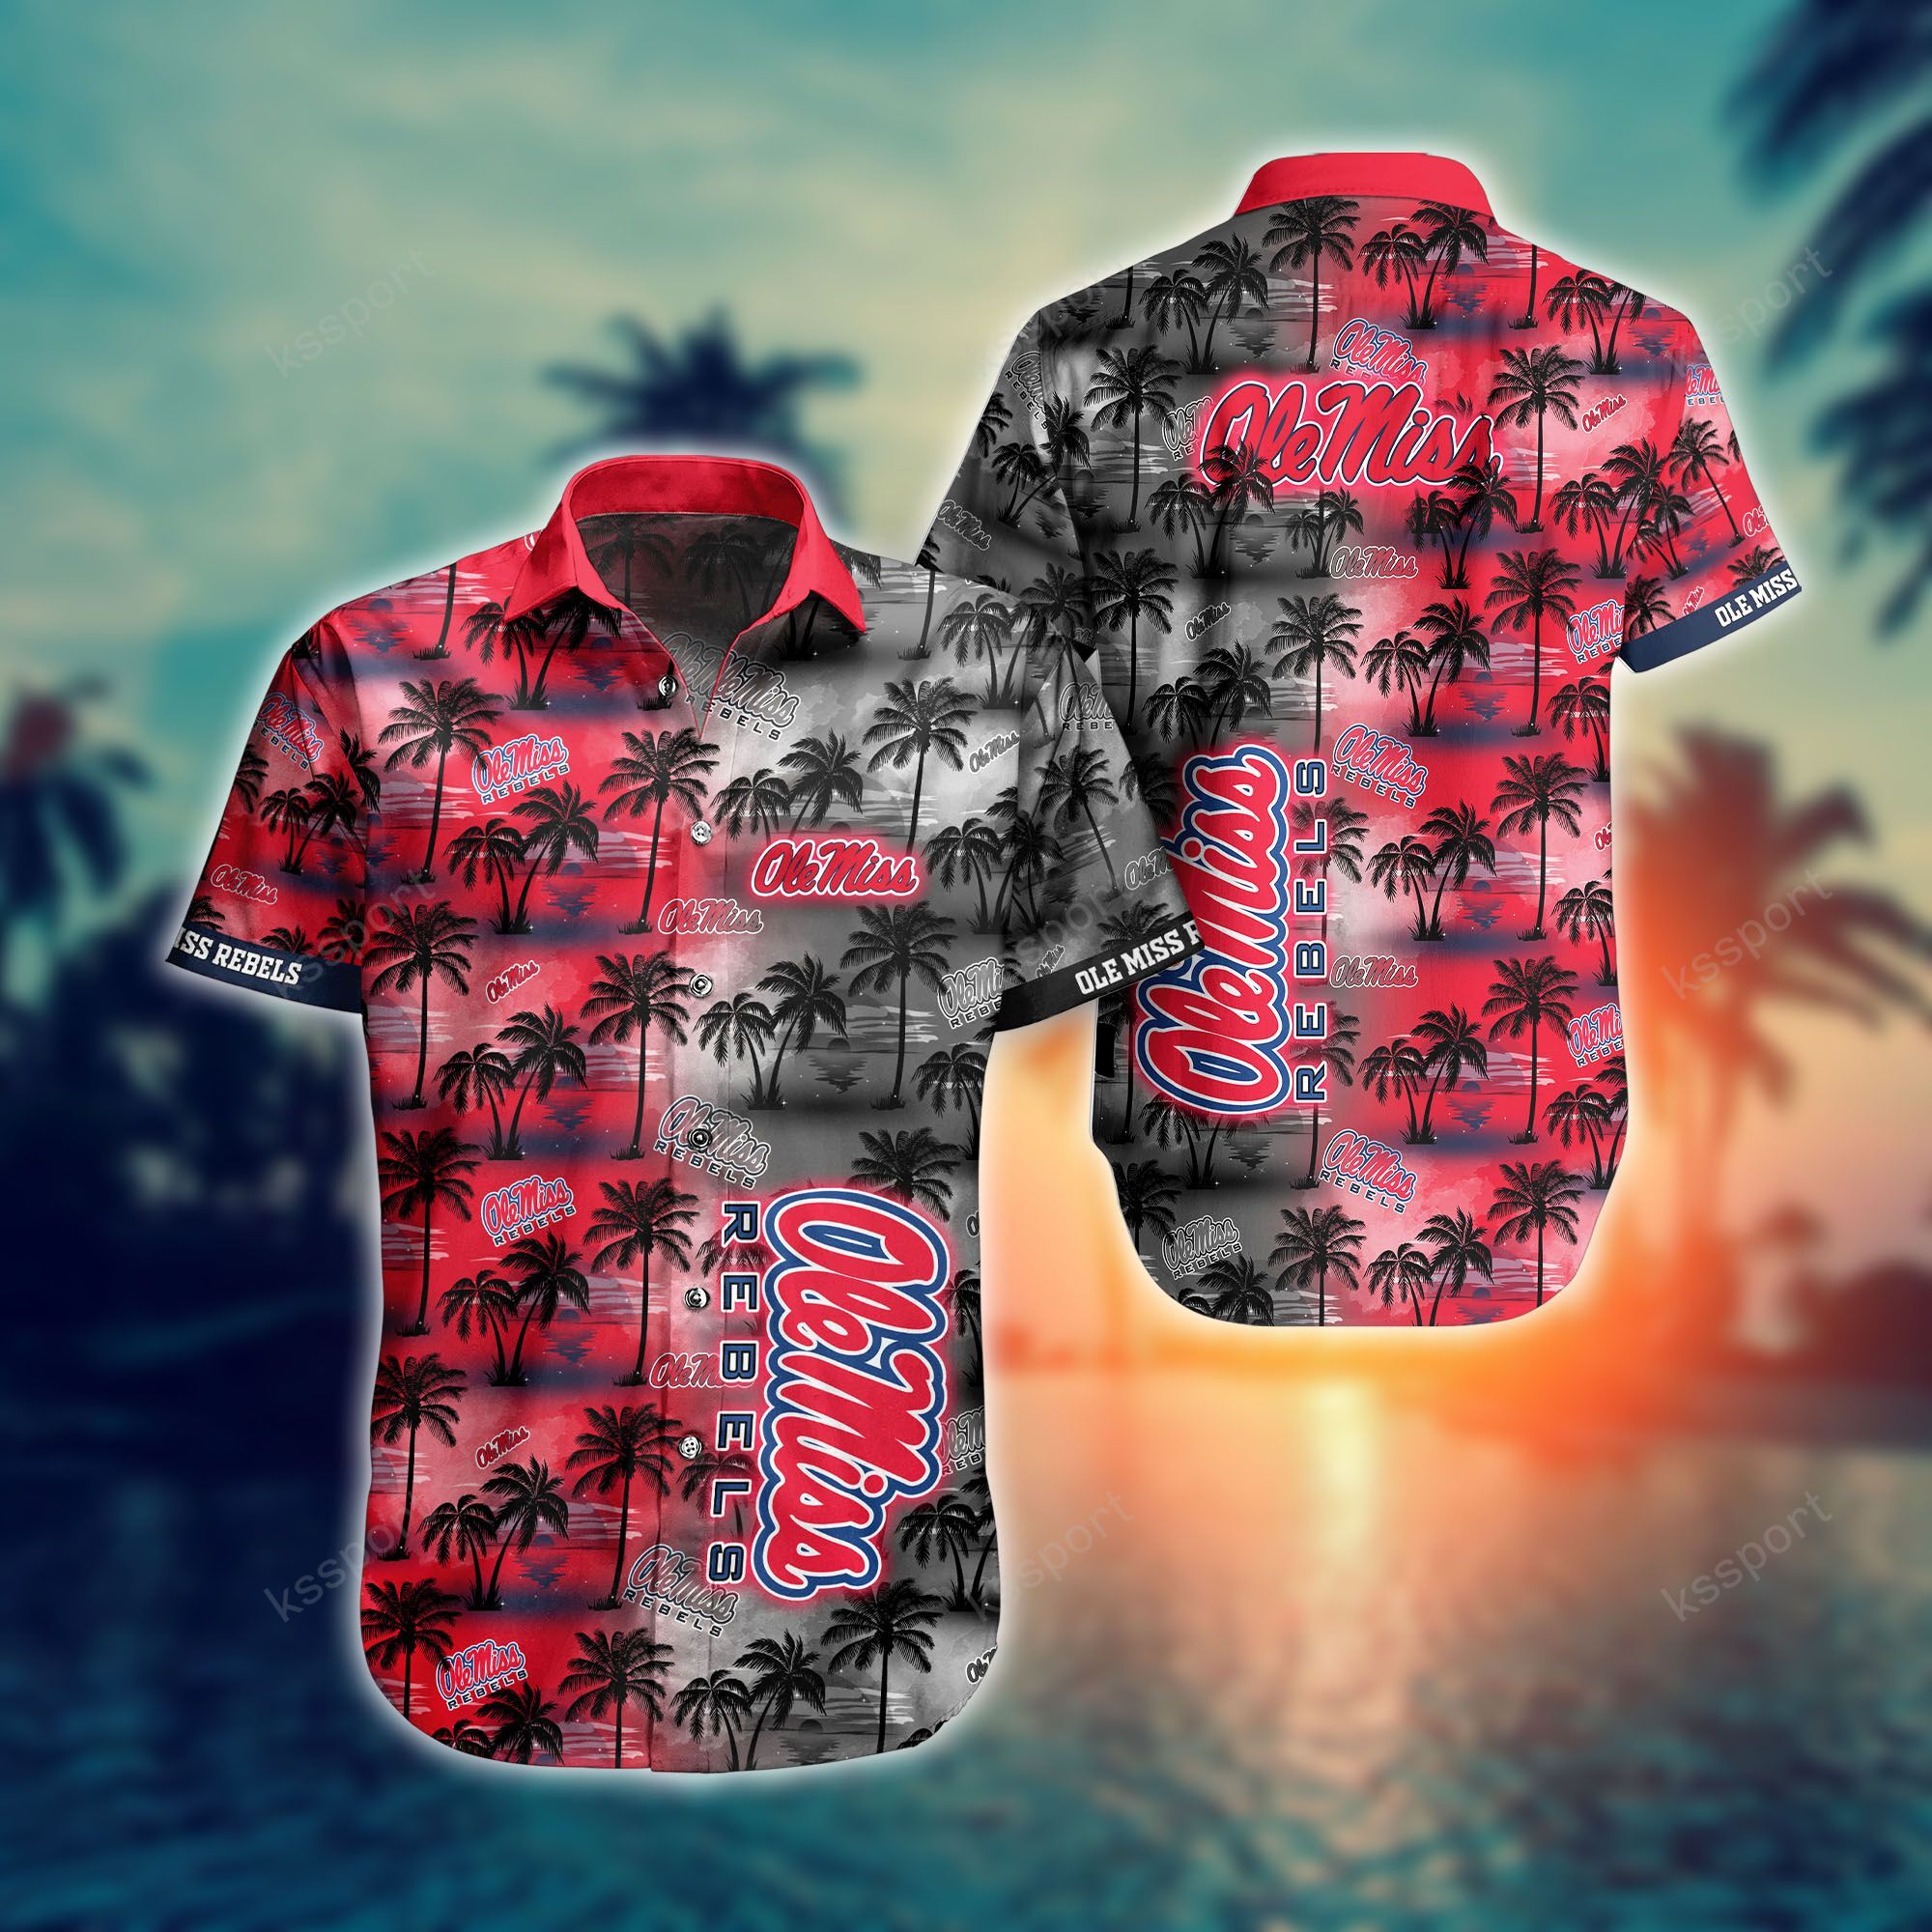 Treat yourself to a cool Hawaiian set today! 50